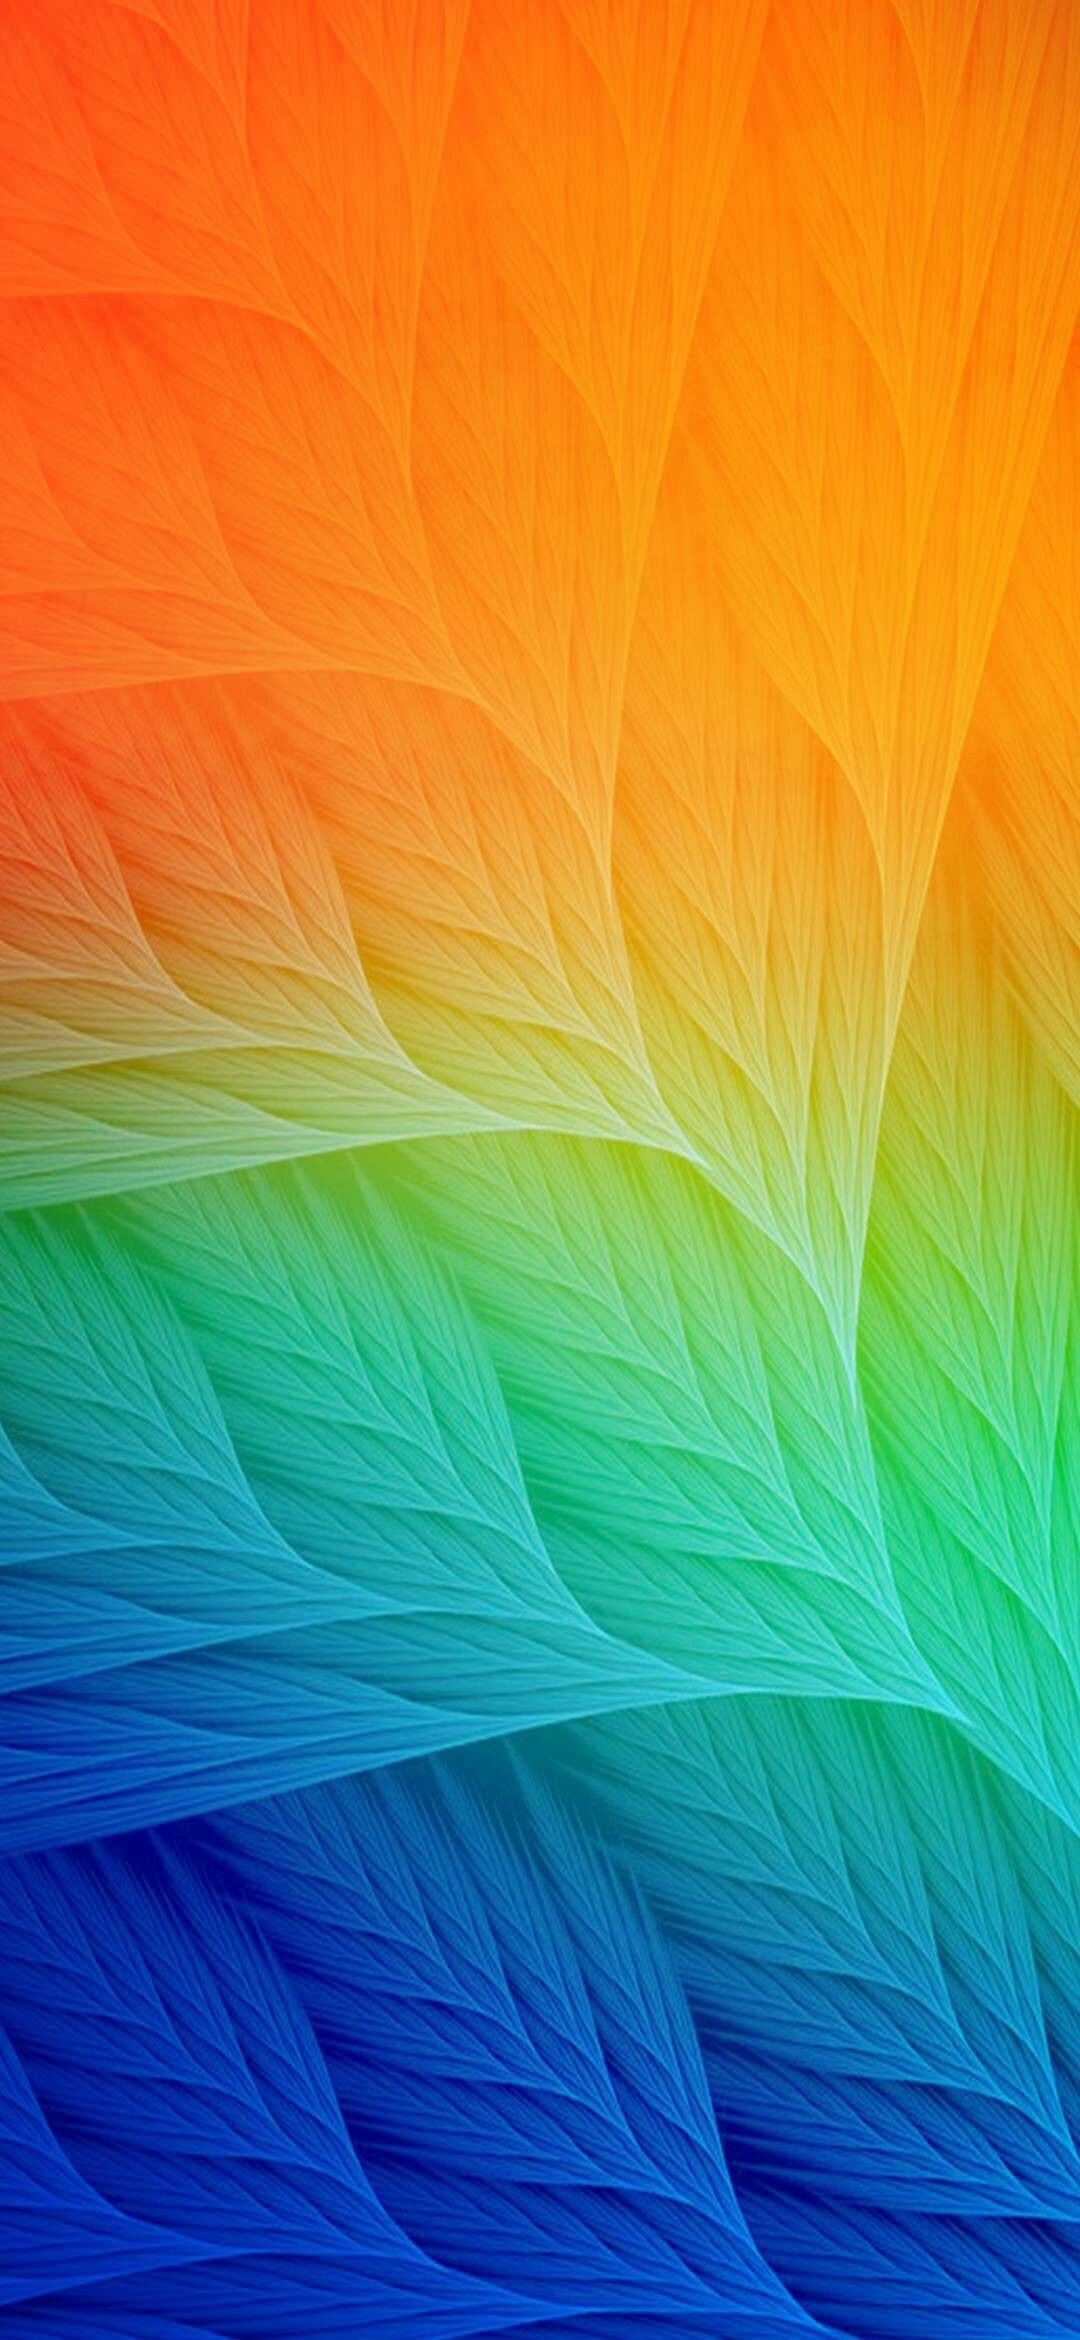 Rainbow Colors: Art that uses straight and curved lines and color to form shapes. 1080x2340 HD Wallpaper.